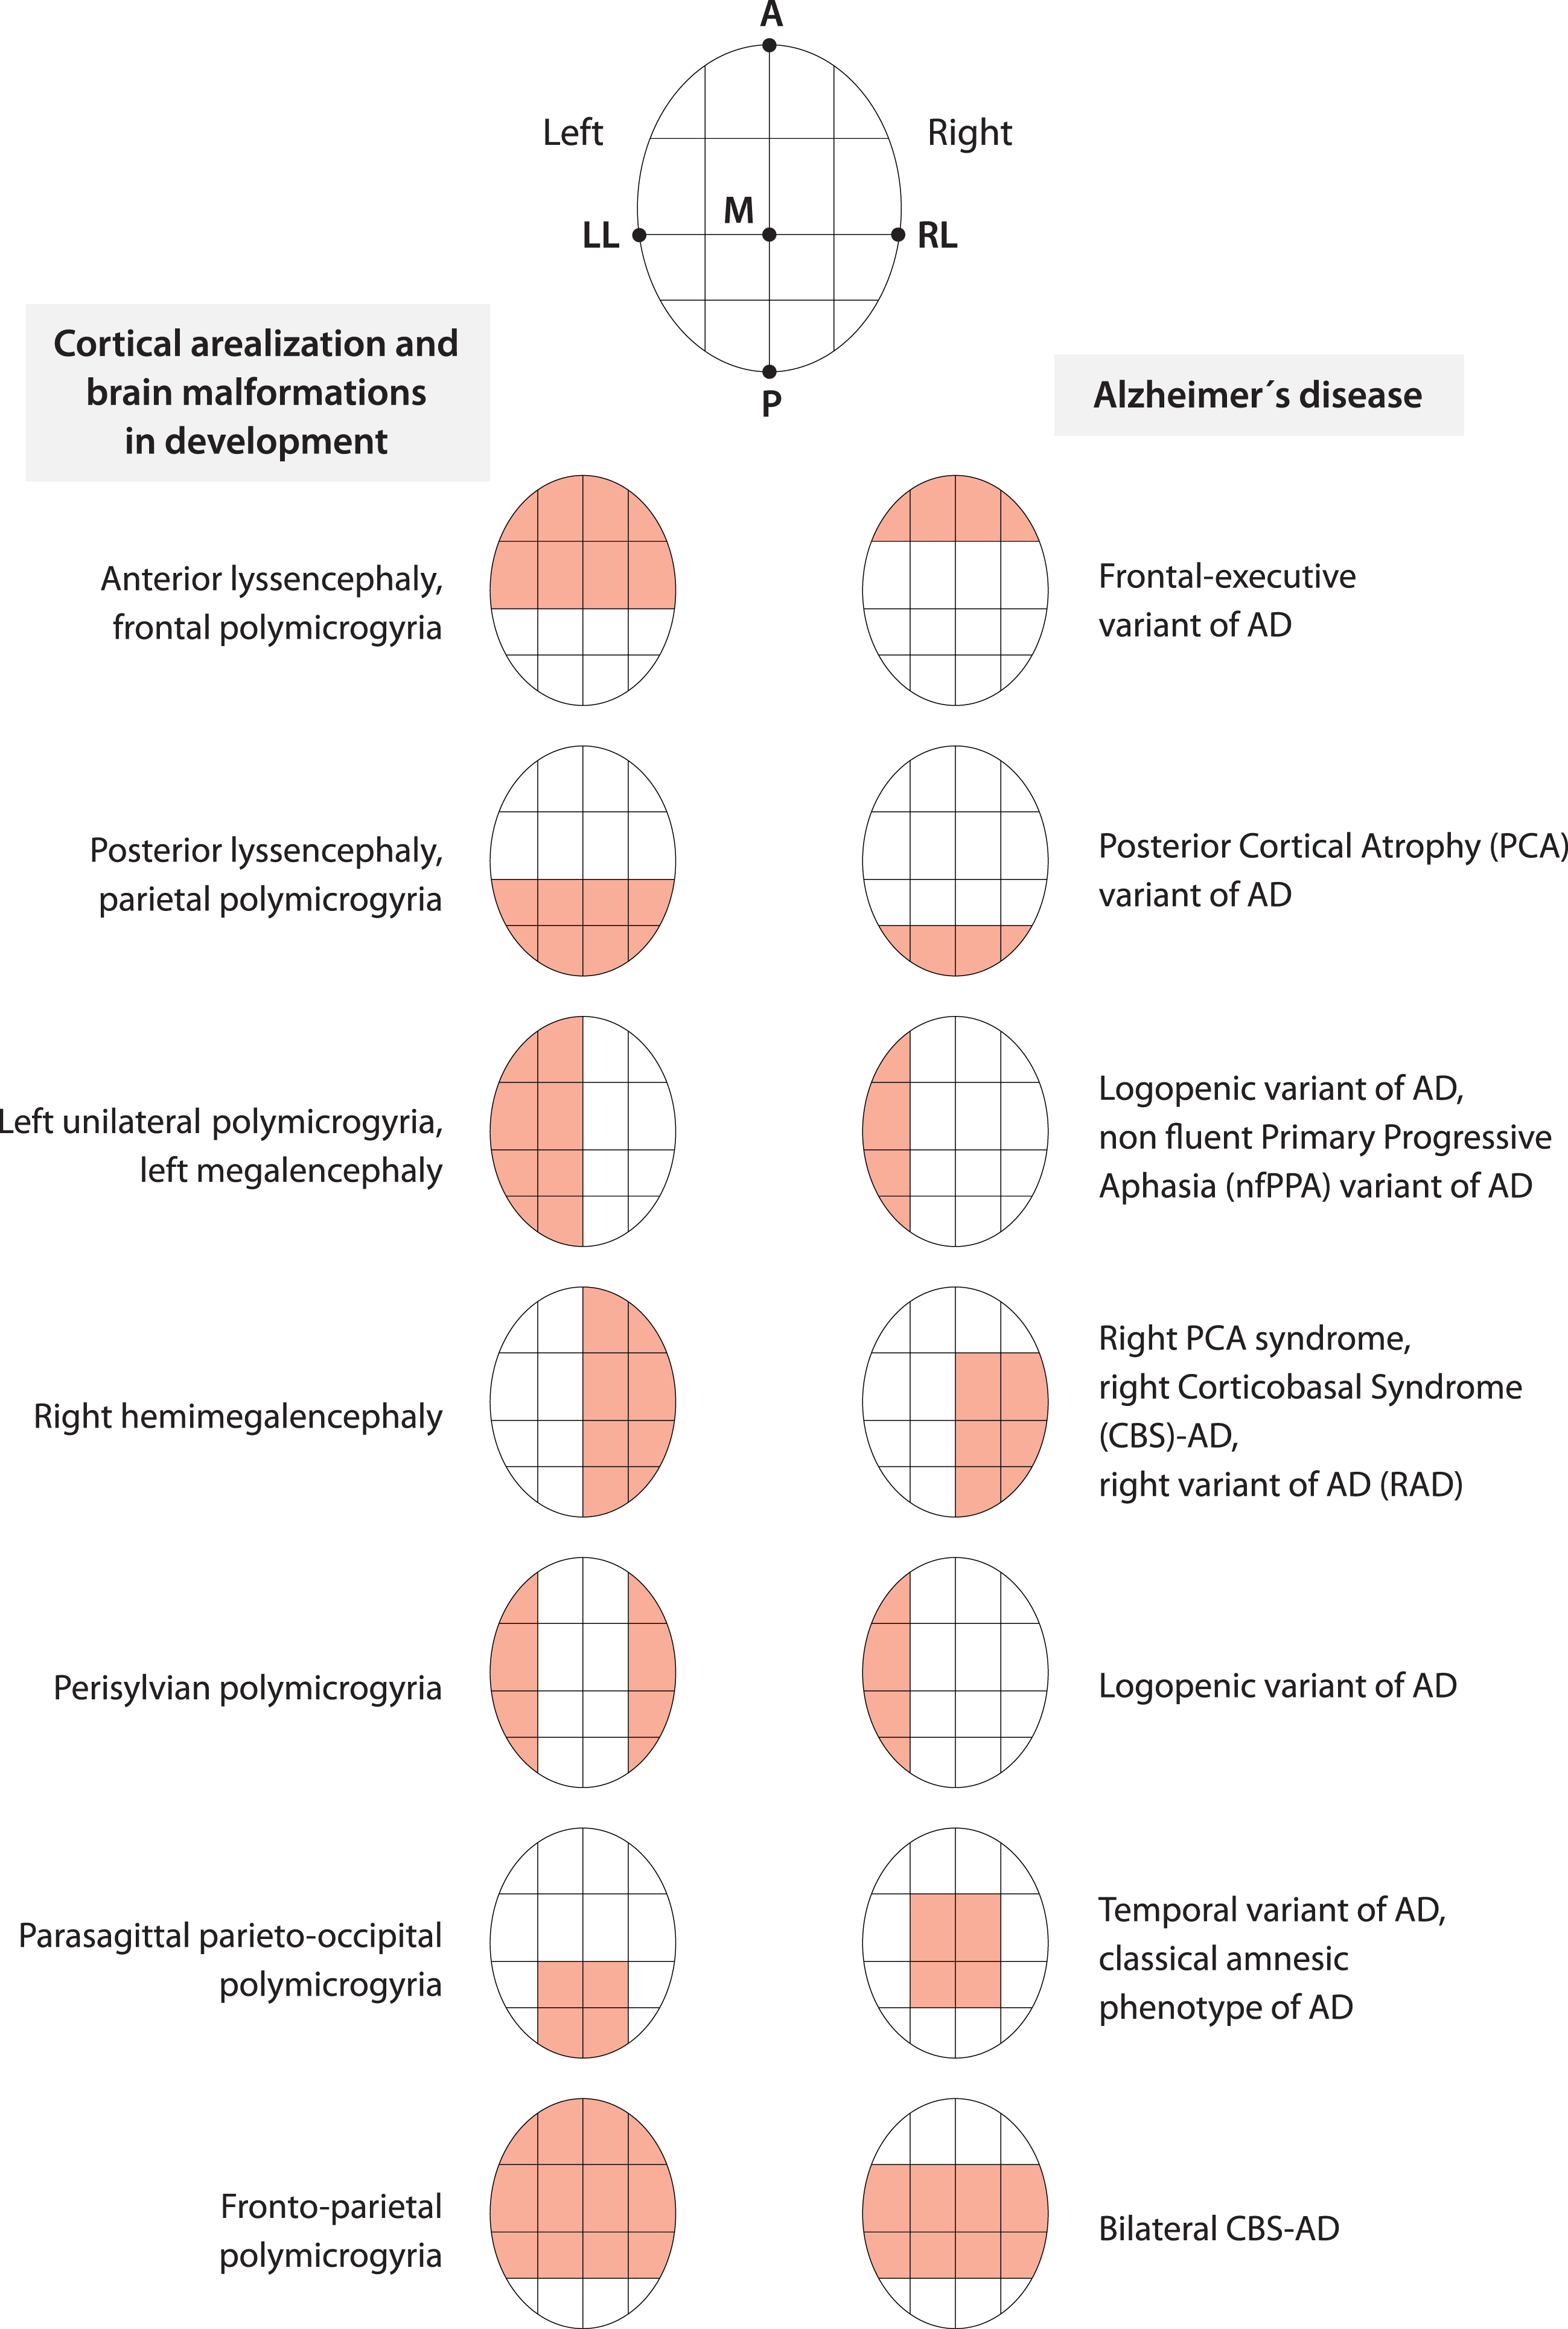 Cortical arealization in development and AD appear to share the same alphabet of spatial information about brain topography. The coarse distribution over the cortex of brain malformations due to the failure of the arealization program during development and the key regions targeted by AD, considering all phenotypes, seem to follow the same few topographical instructions related to anterior-posterior, medial-lateral, dorsal-ventral brain axes and a simple left-right hemisphere specification. Figure 3 was produced by Antonio Garcia, scientific illustrator from Bio-Graphics. This is a modified version of Fig. 1 in Abbate (2018) [366].